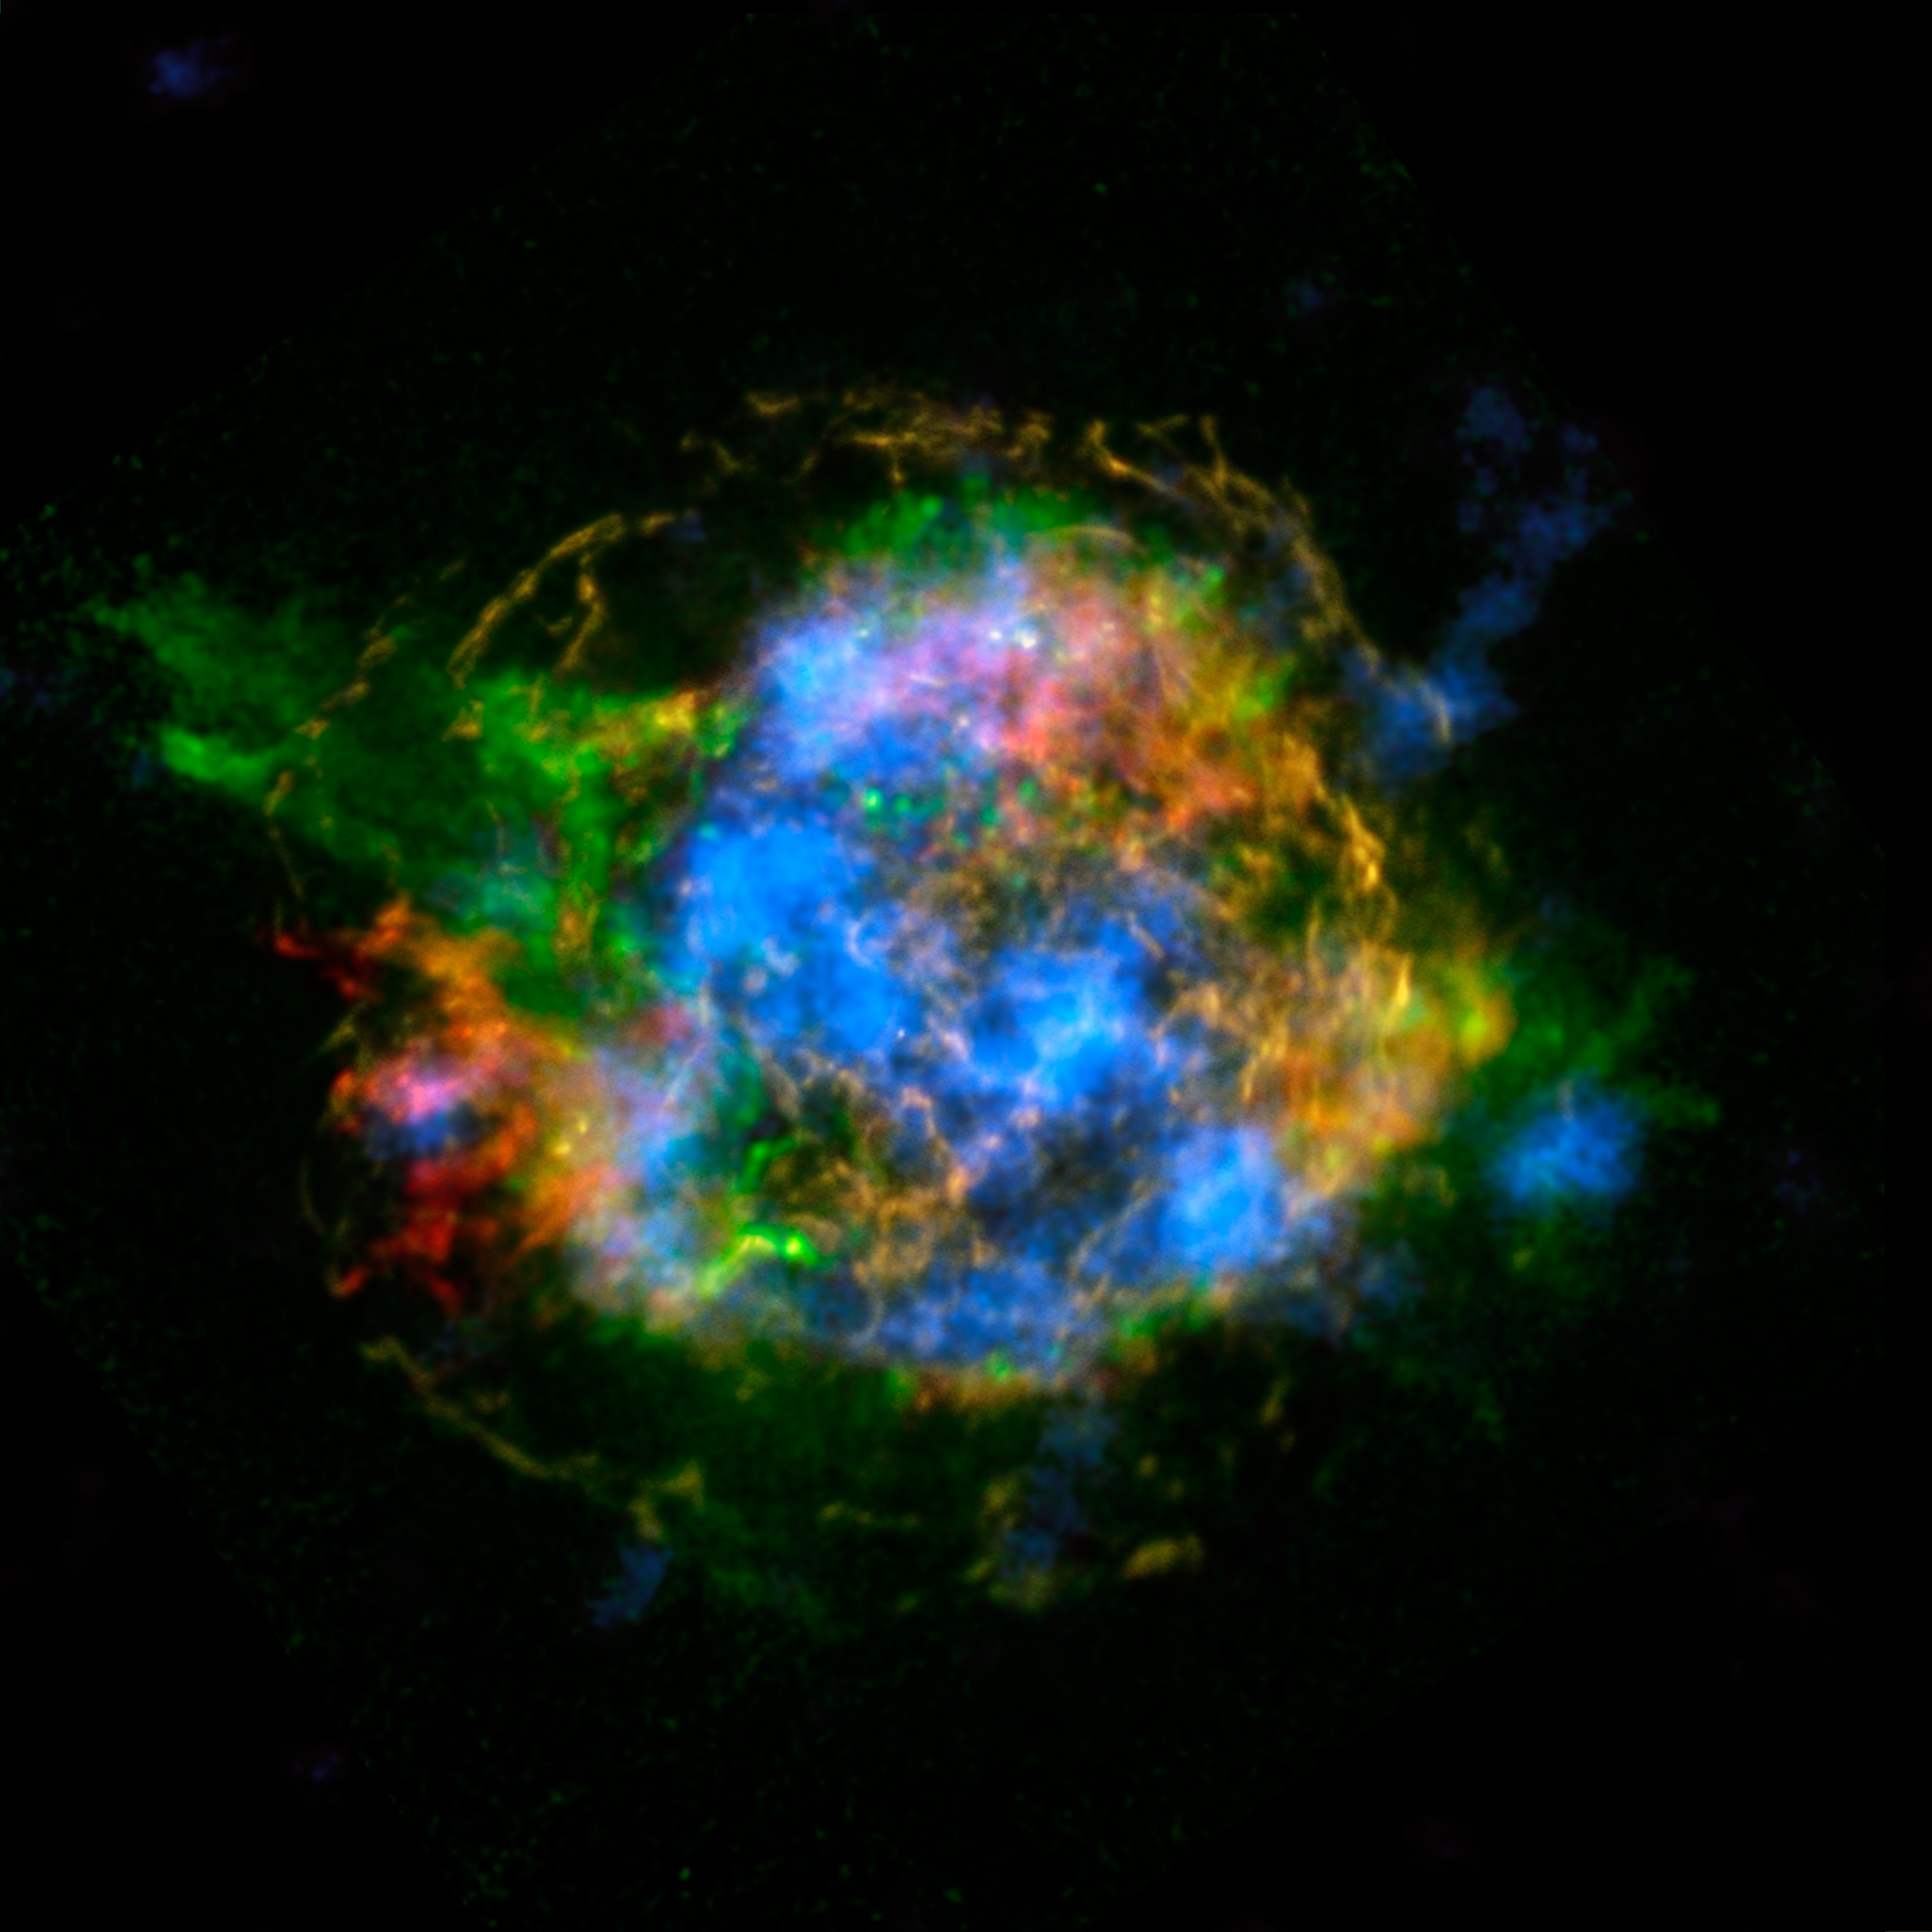 Untangling the Remains of Cassiopeia A